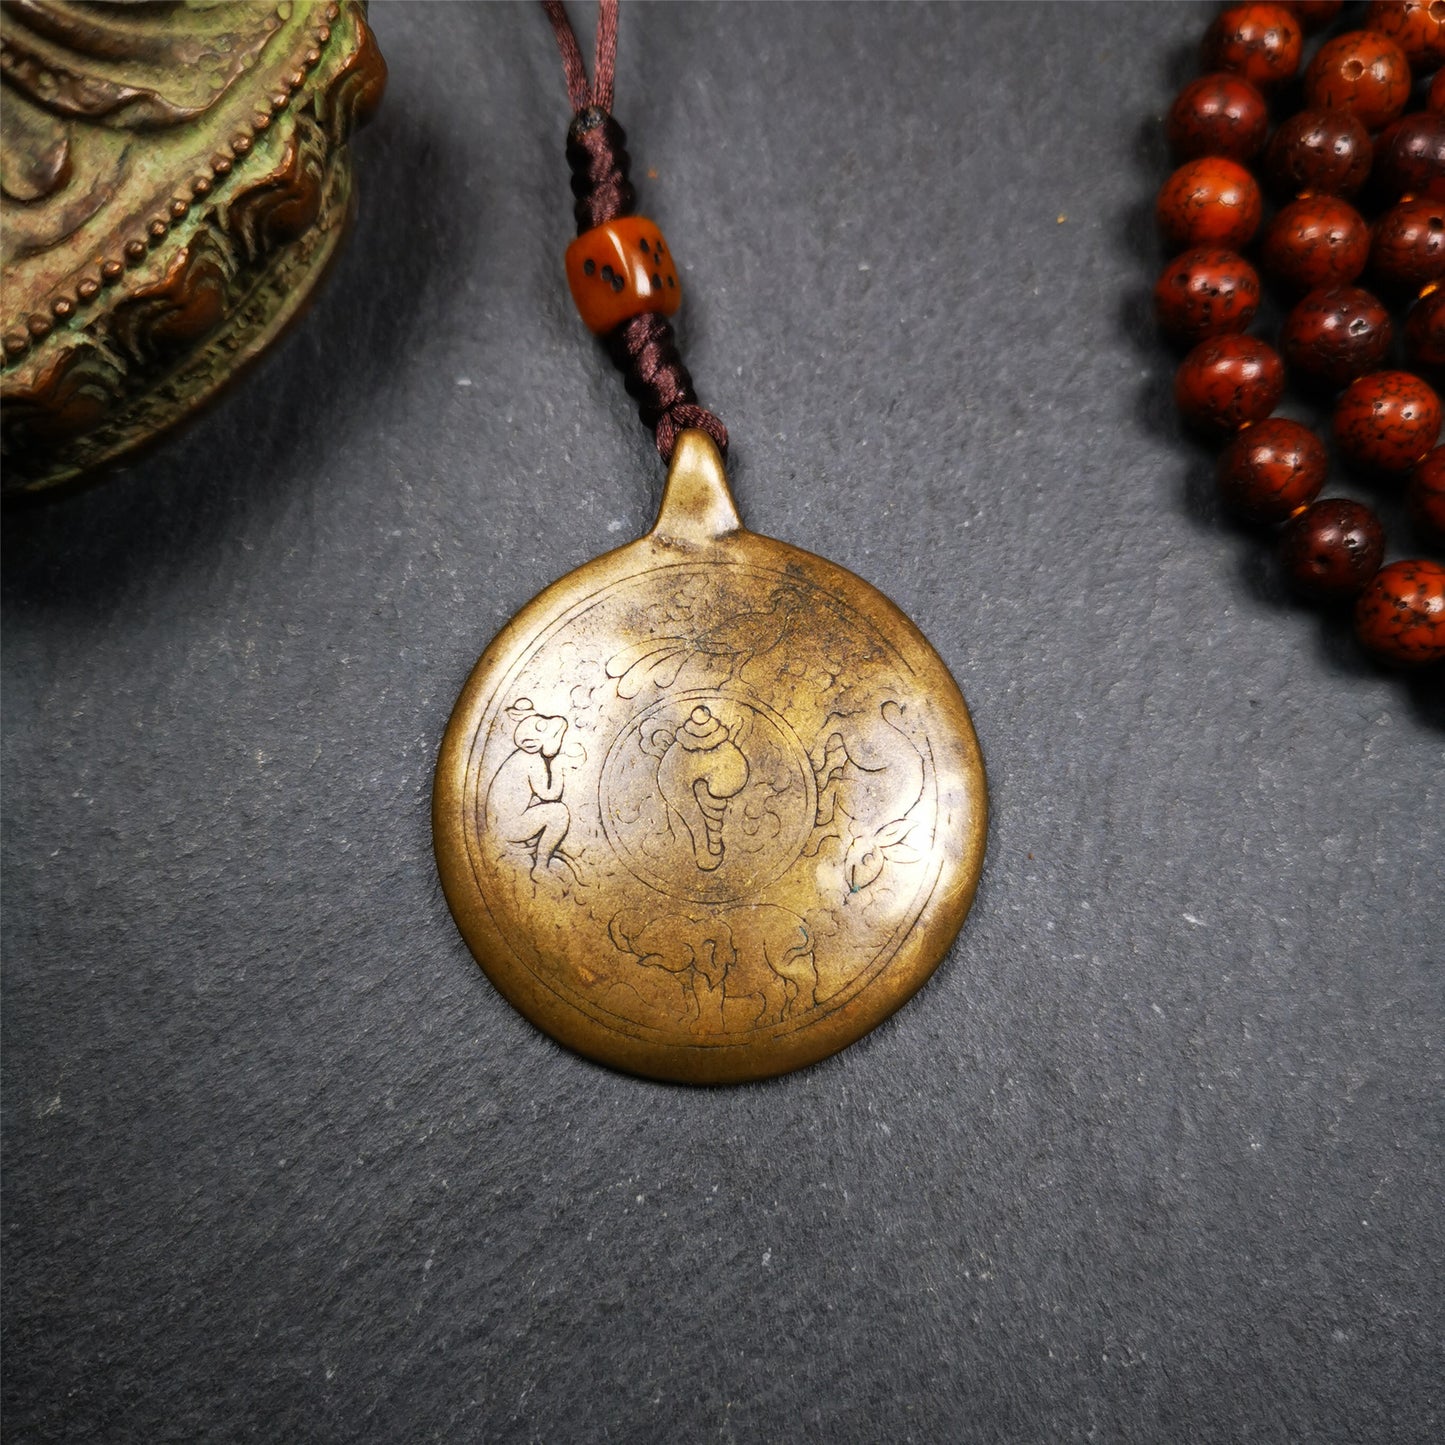 This unique tibetan melong badge was handmade by Tibetan Artist from Baiyu County. It's a Astrology Protective Amulet Pendant,made of lima brass,the front pattern is Tibetan Budhist Protective Amulet Pendant - SIPAHO,the back is harmonious animals.